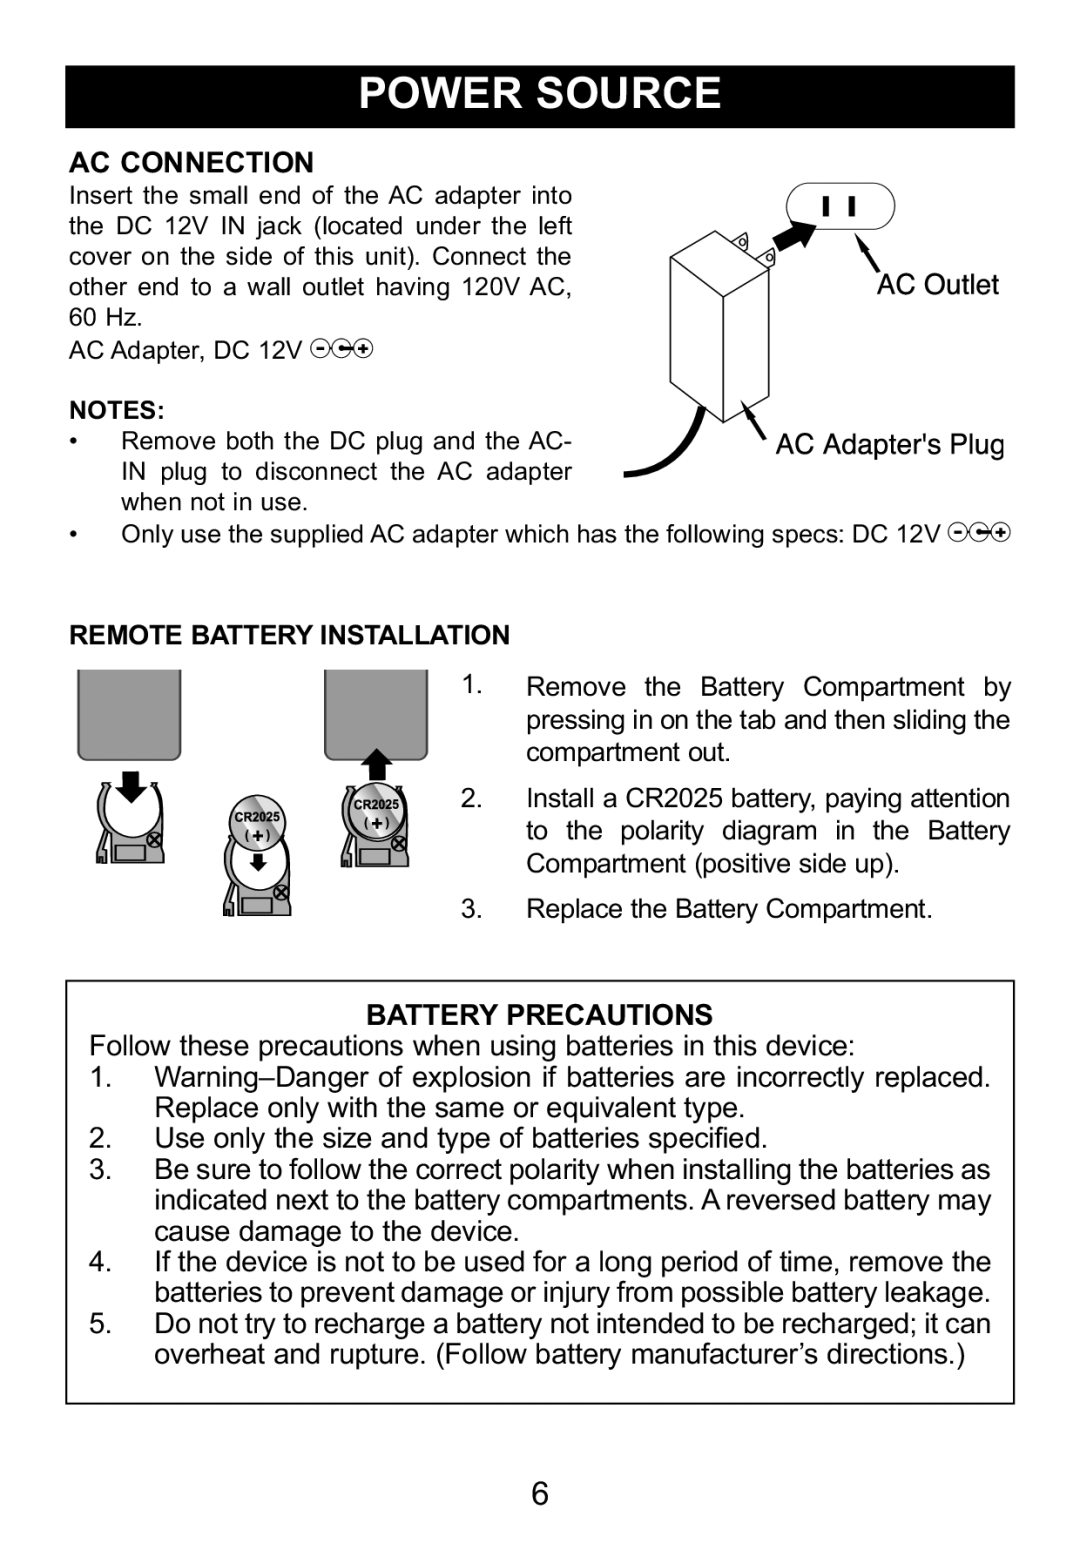 Memorex MDF8402-LWD manual Ac Connection, Battery Precautions, Follow these precautions when using batteries in this device 